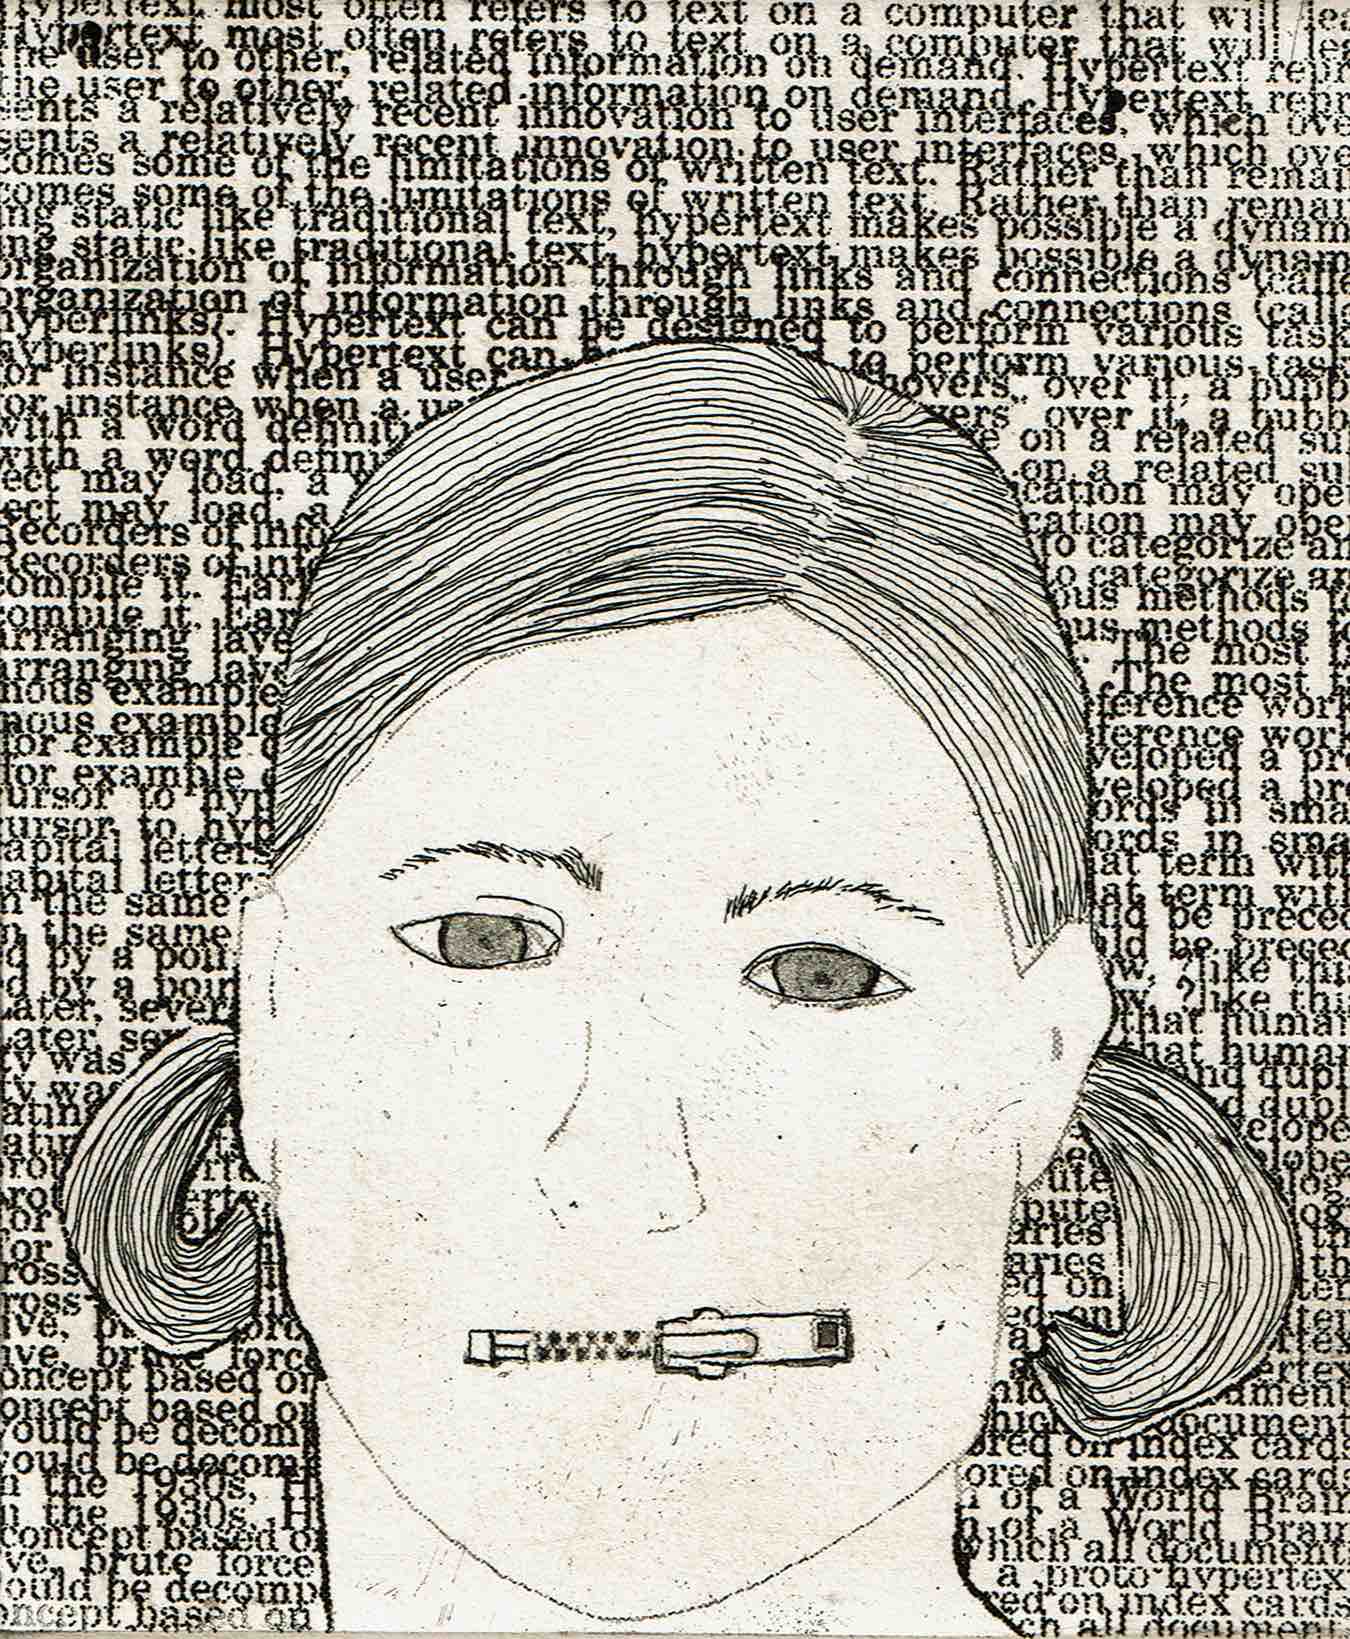 Front and centre of this etching is a girl’s white face, eyes look toward us. Her face is simple, plain, made with sketchy black lines. There is no shading or depth. Instead of a mouth, there is a zipper, closed. Her hair is in pigtails, made with simple black lines. The background is a chaotic layering of typewritten text - sentences are unintelligible.